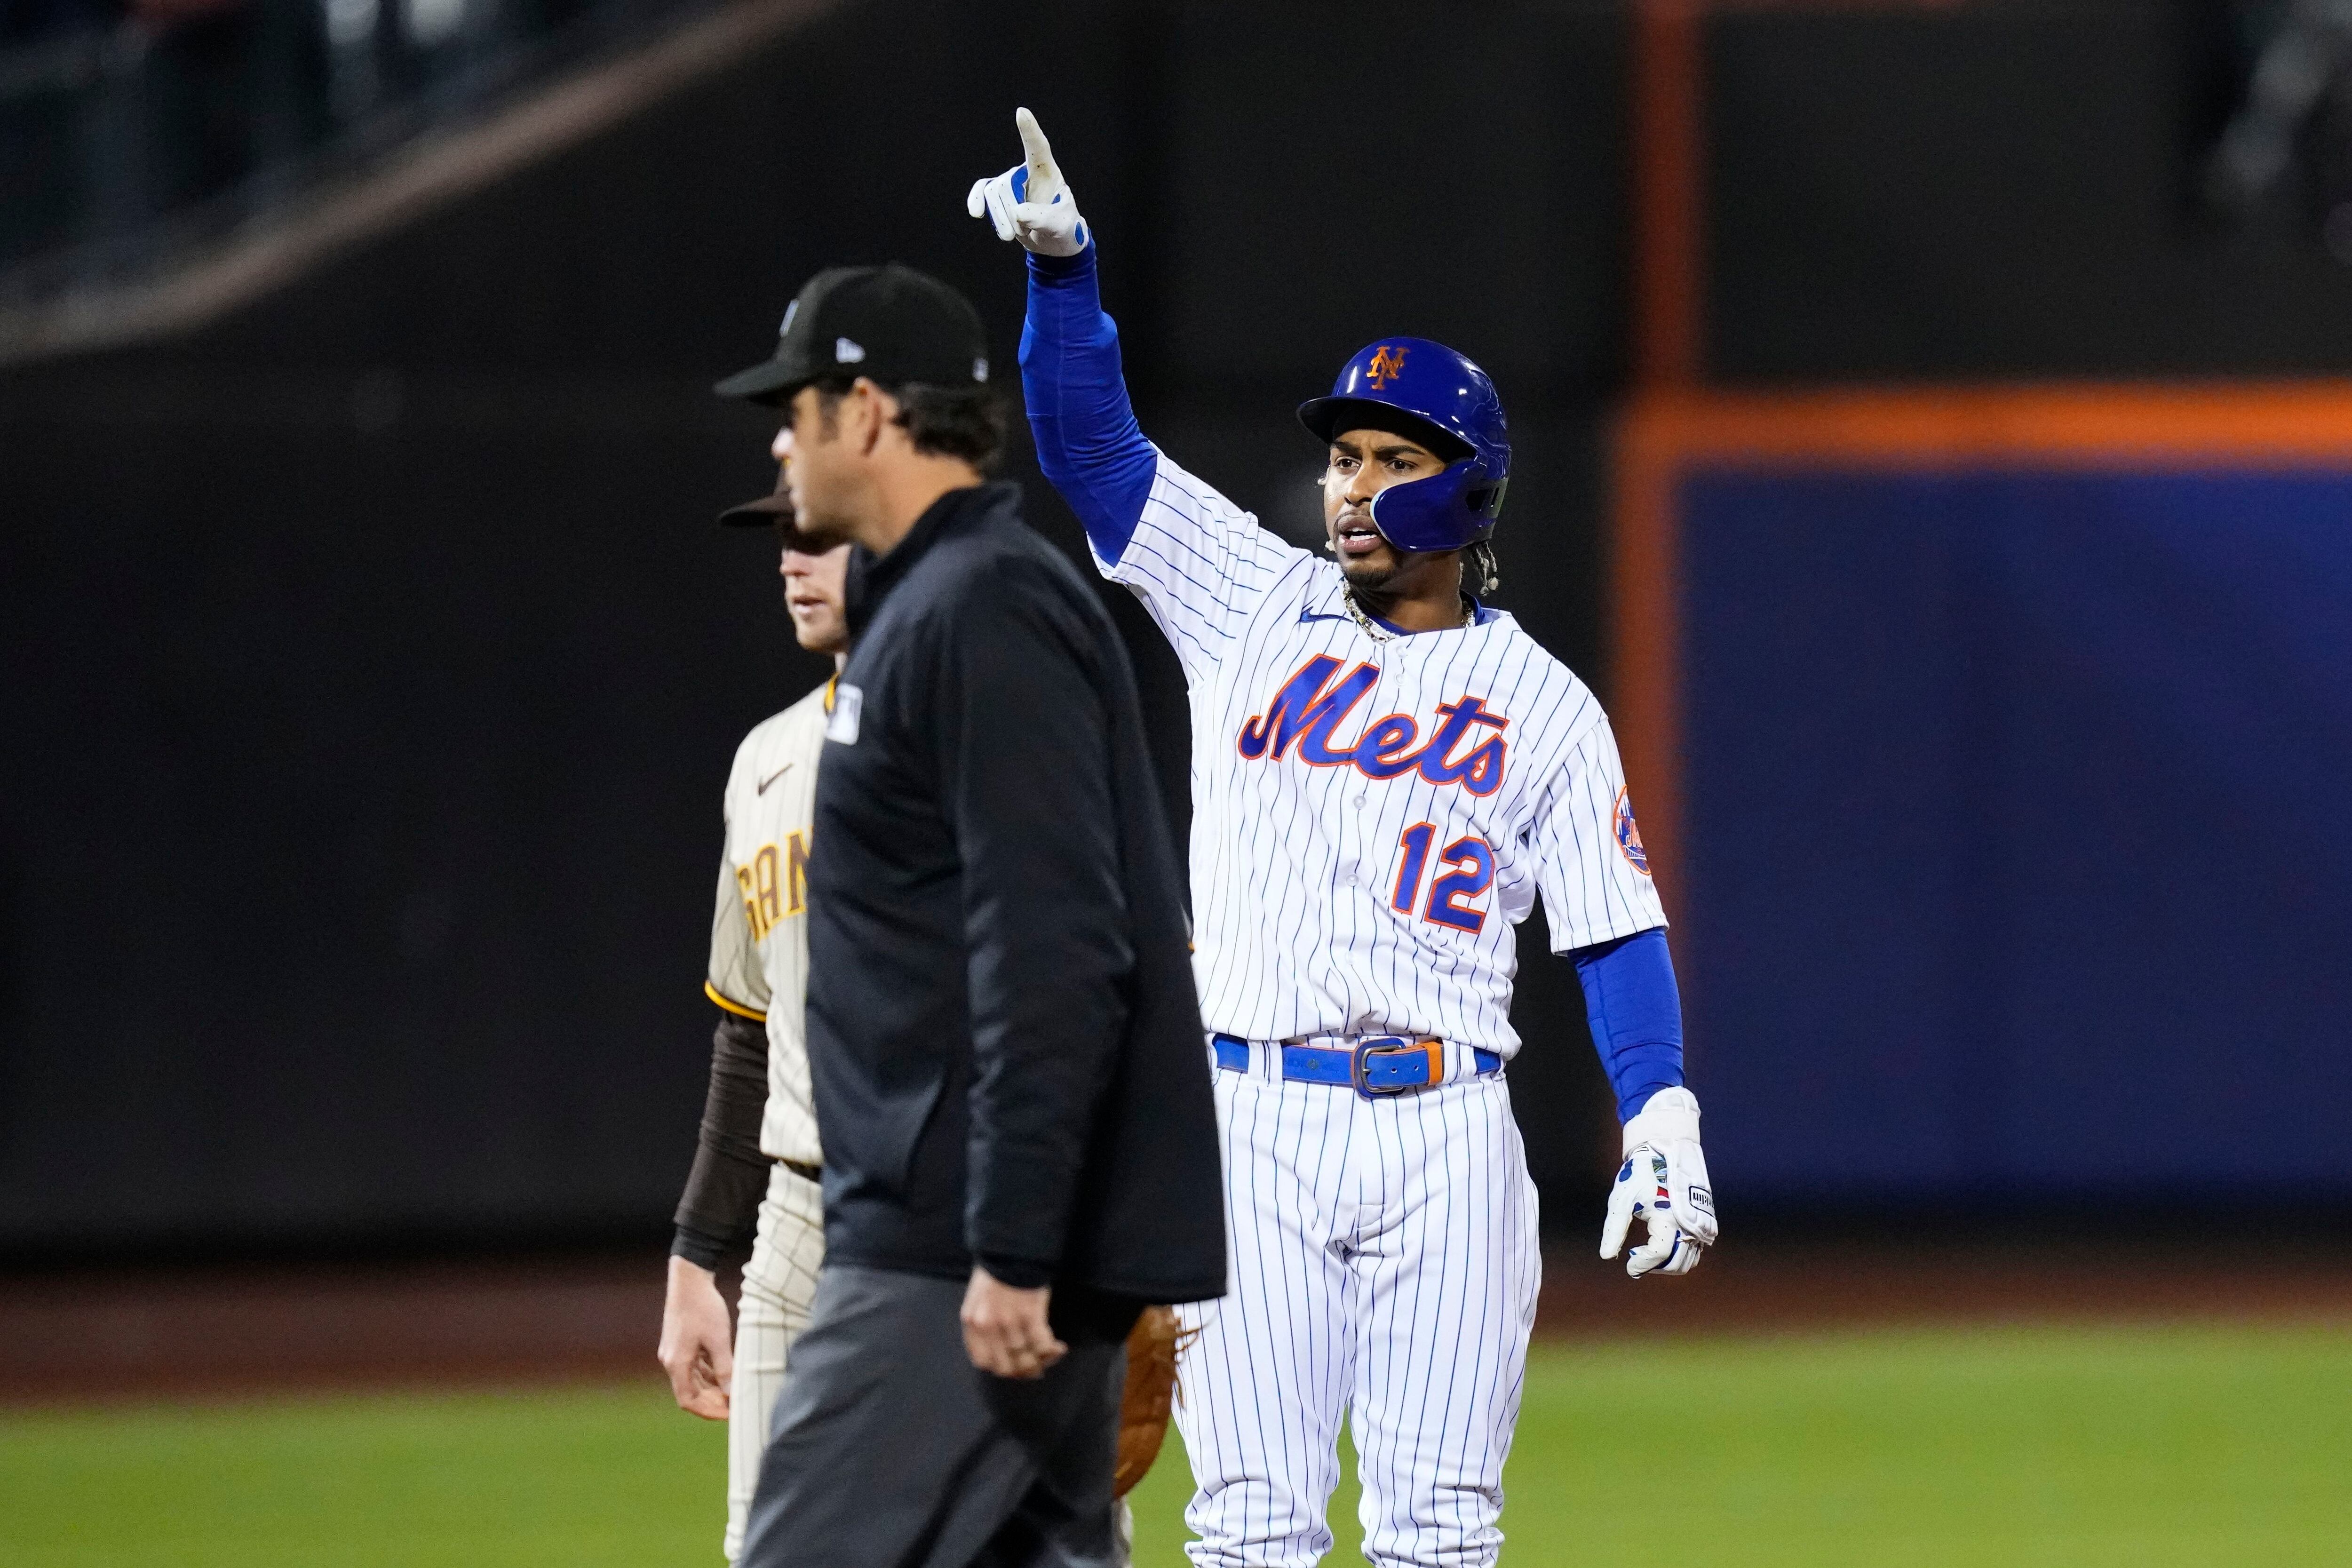 Starling Marte drilled in head by pitch, forced to leave Mets